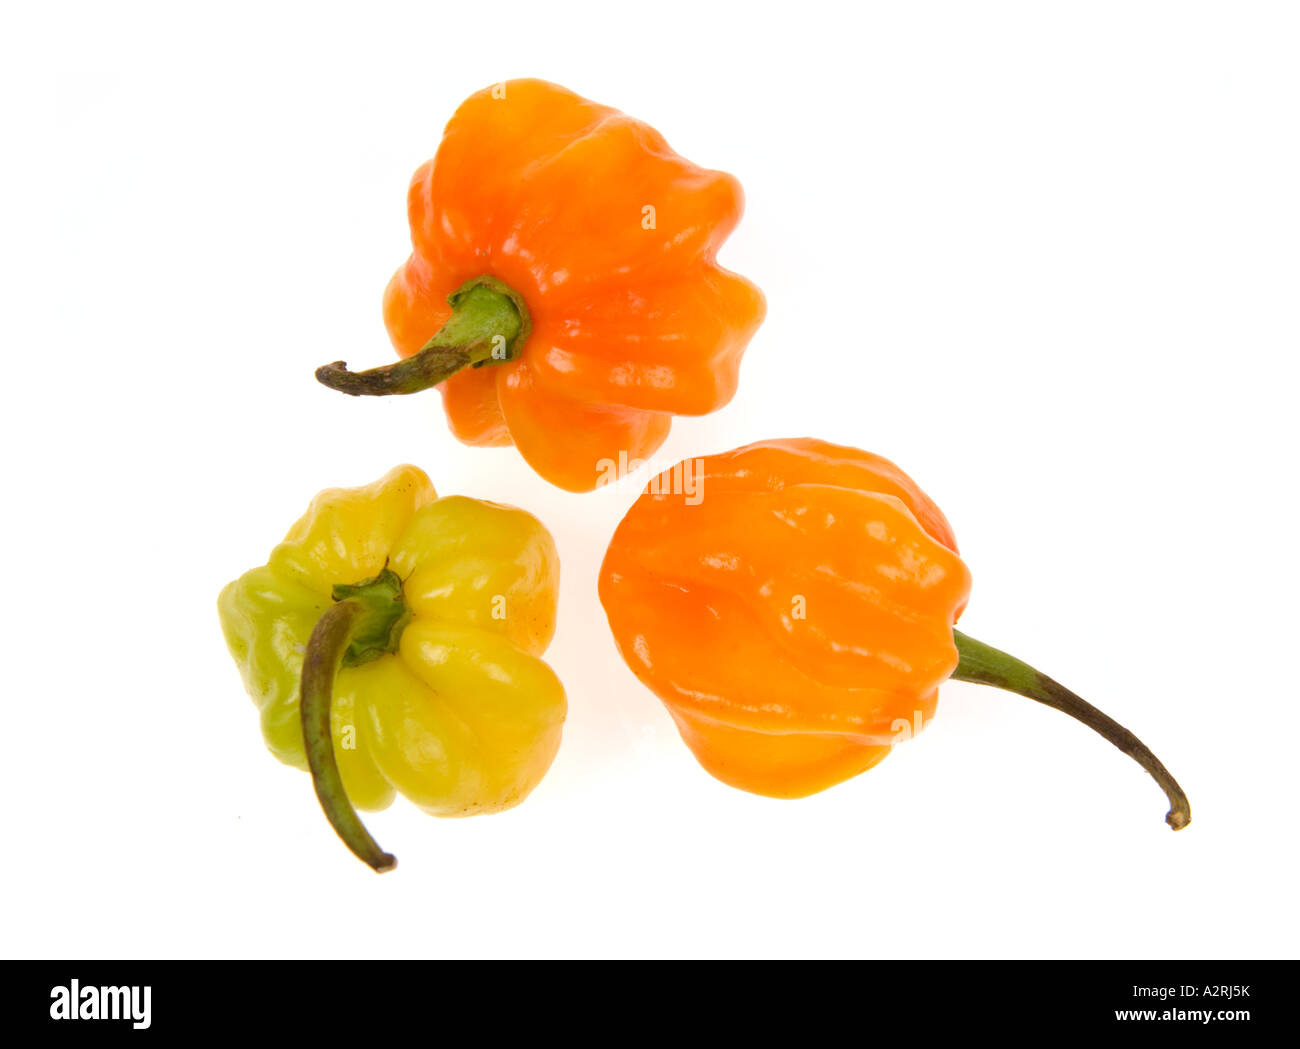 HABANEROS  chilli very Hot spicy chilli peppers yellow green orange red 3 three Stock Photo